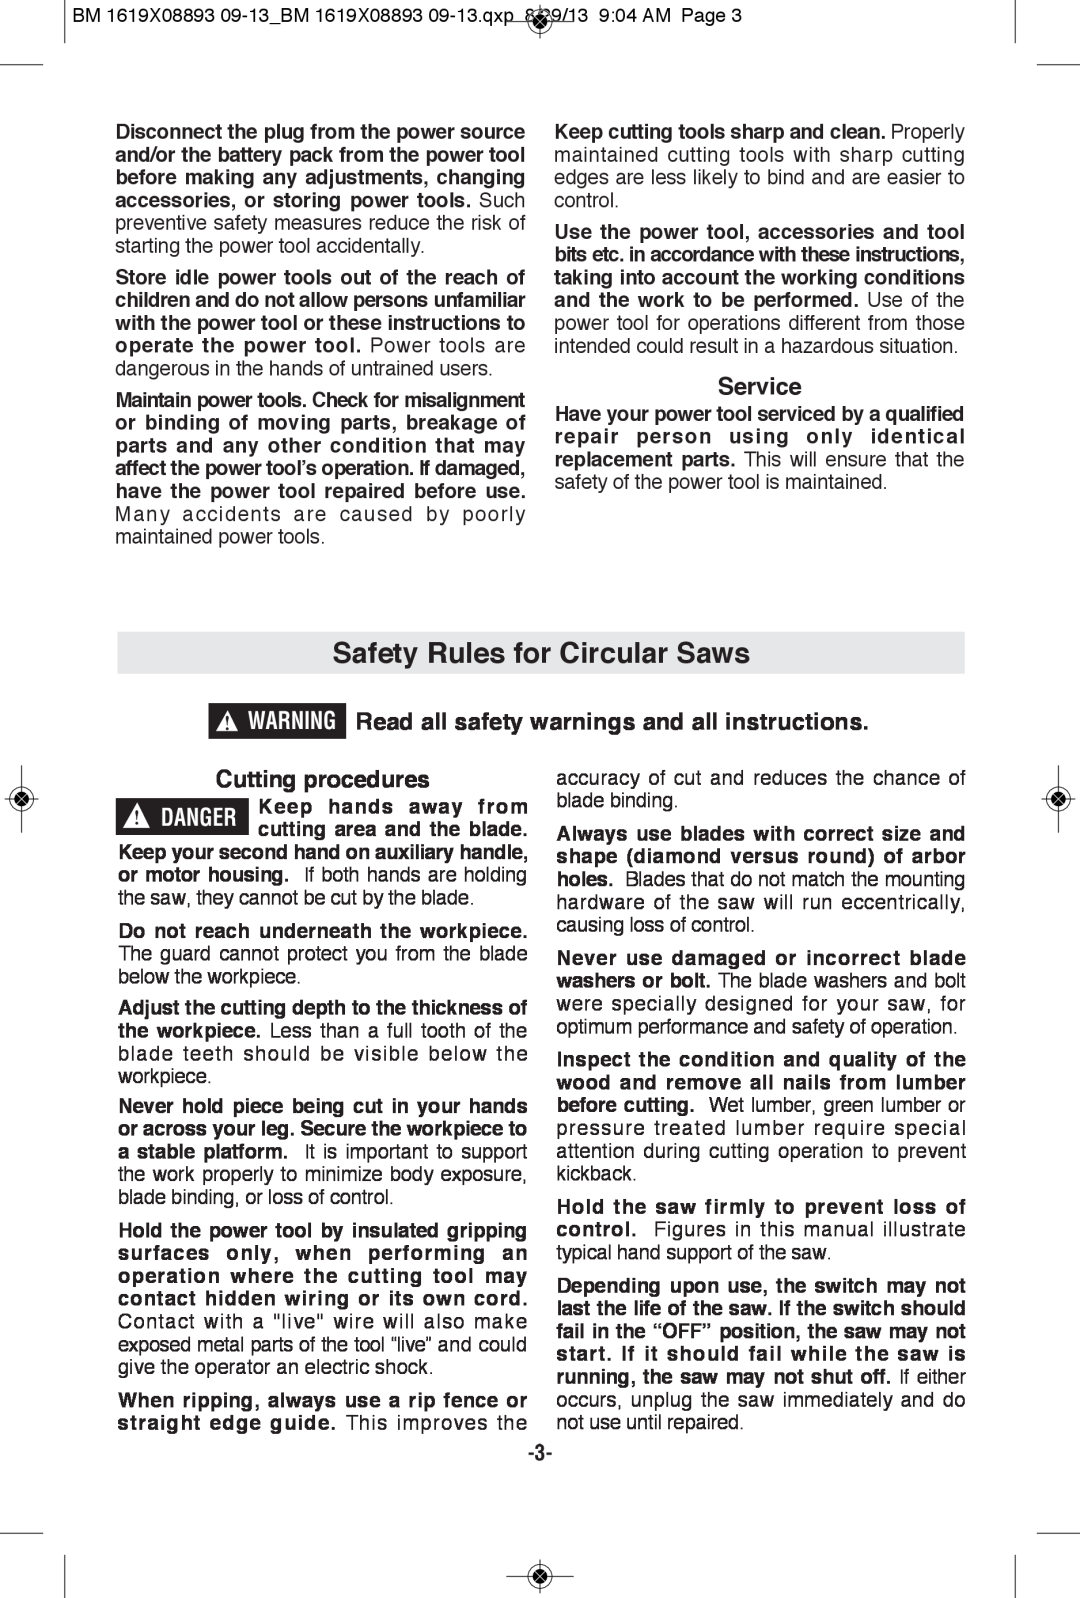 Bosch Power Tools CSW41 Safety Rules for Circular Saws, Service, WARNING Read all safety warnings and all instructions 